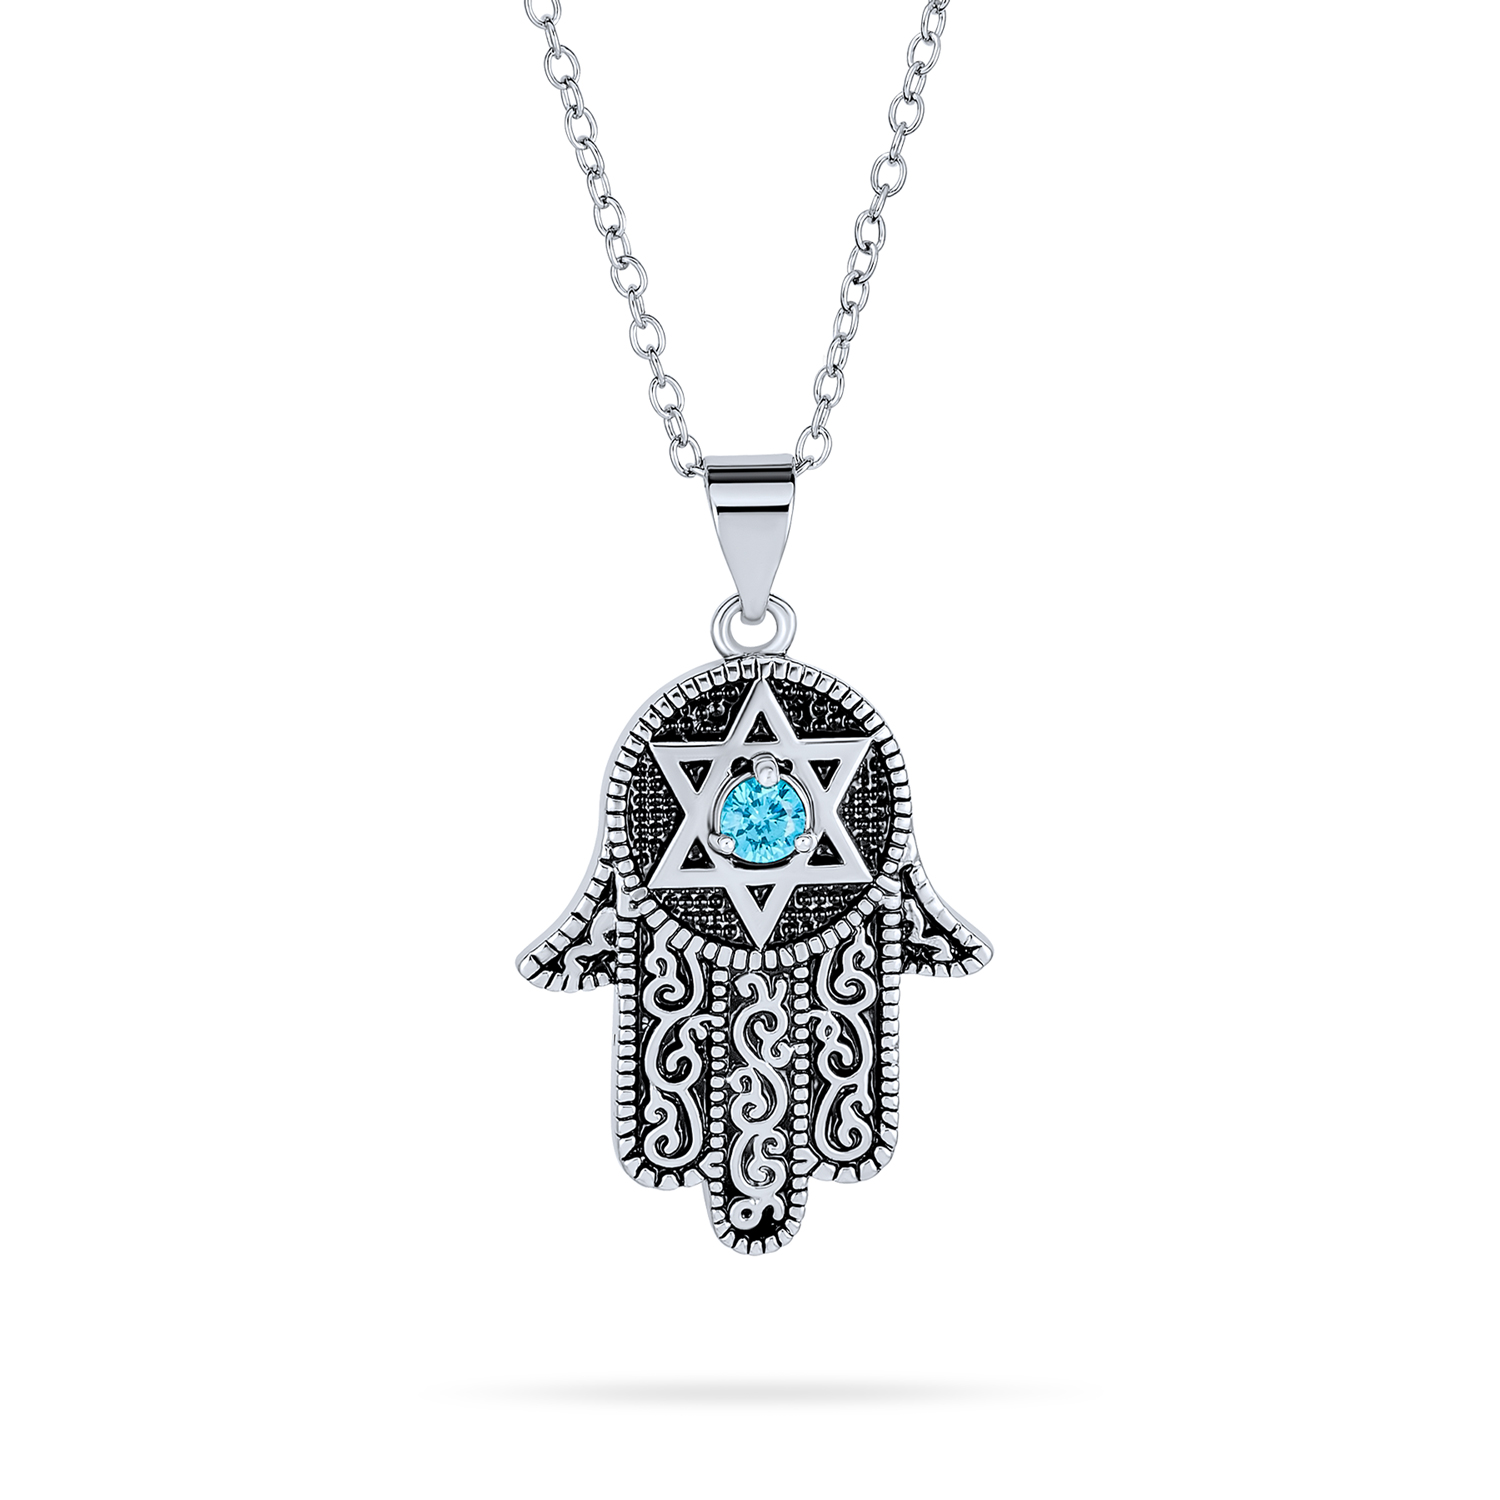 Bling Jewelry Hamsa Hand of God Star of David Pendant Necklace Blue CZ Black Plated - image 1 of 5